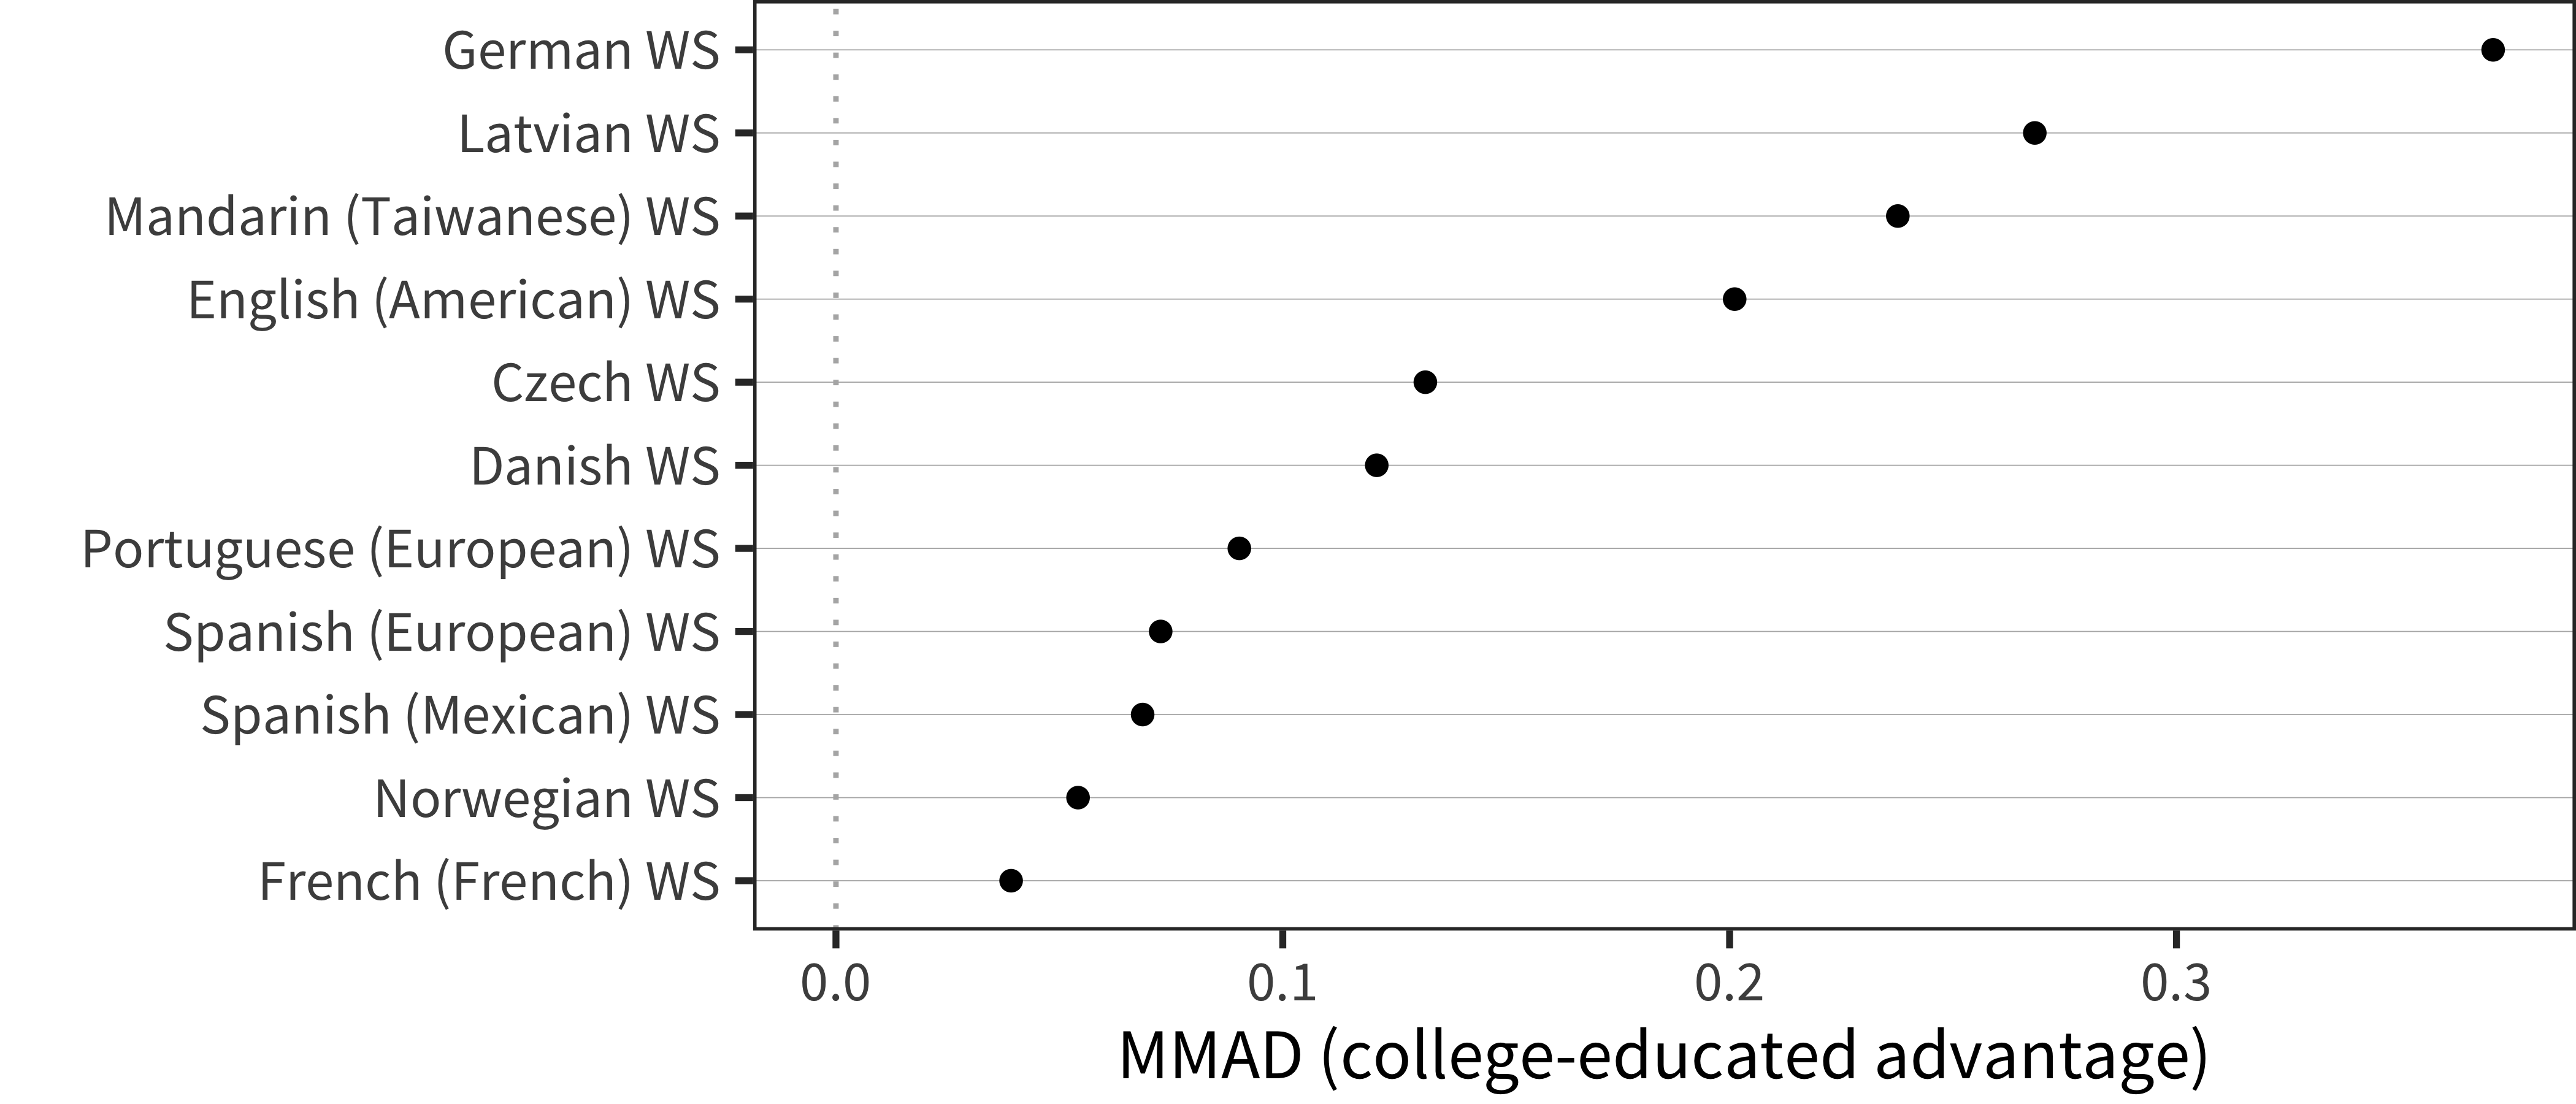 MMAD college-educated advantage for WS production data in each language averaged over age.